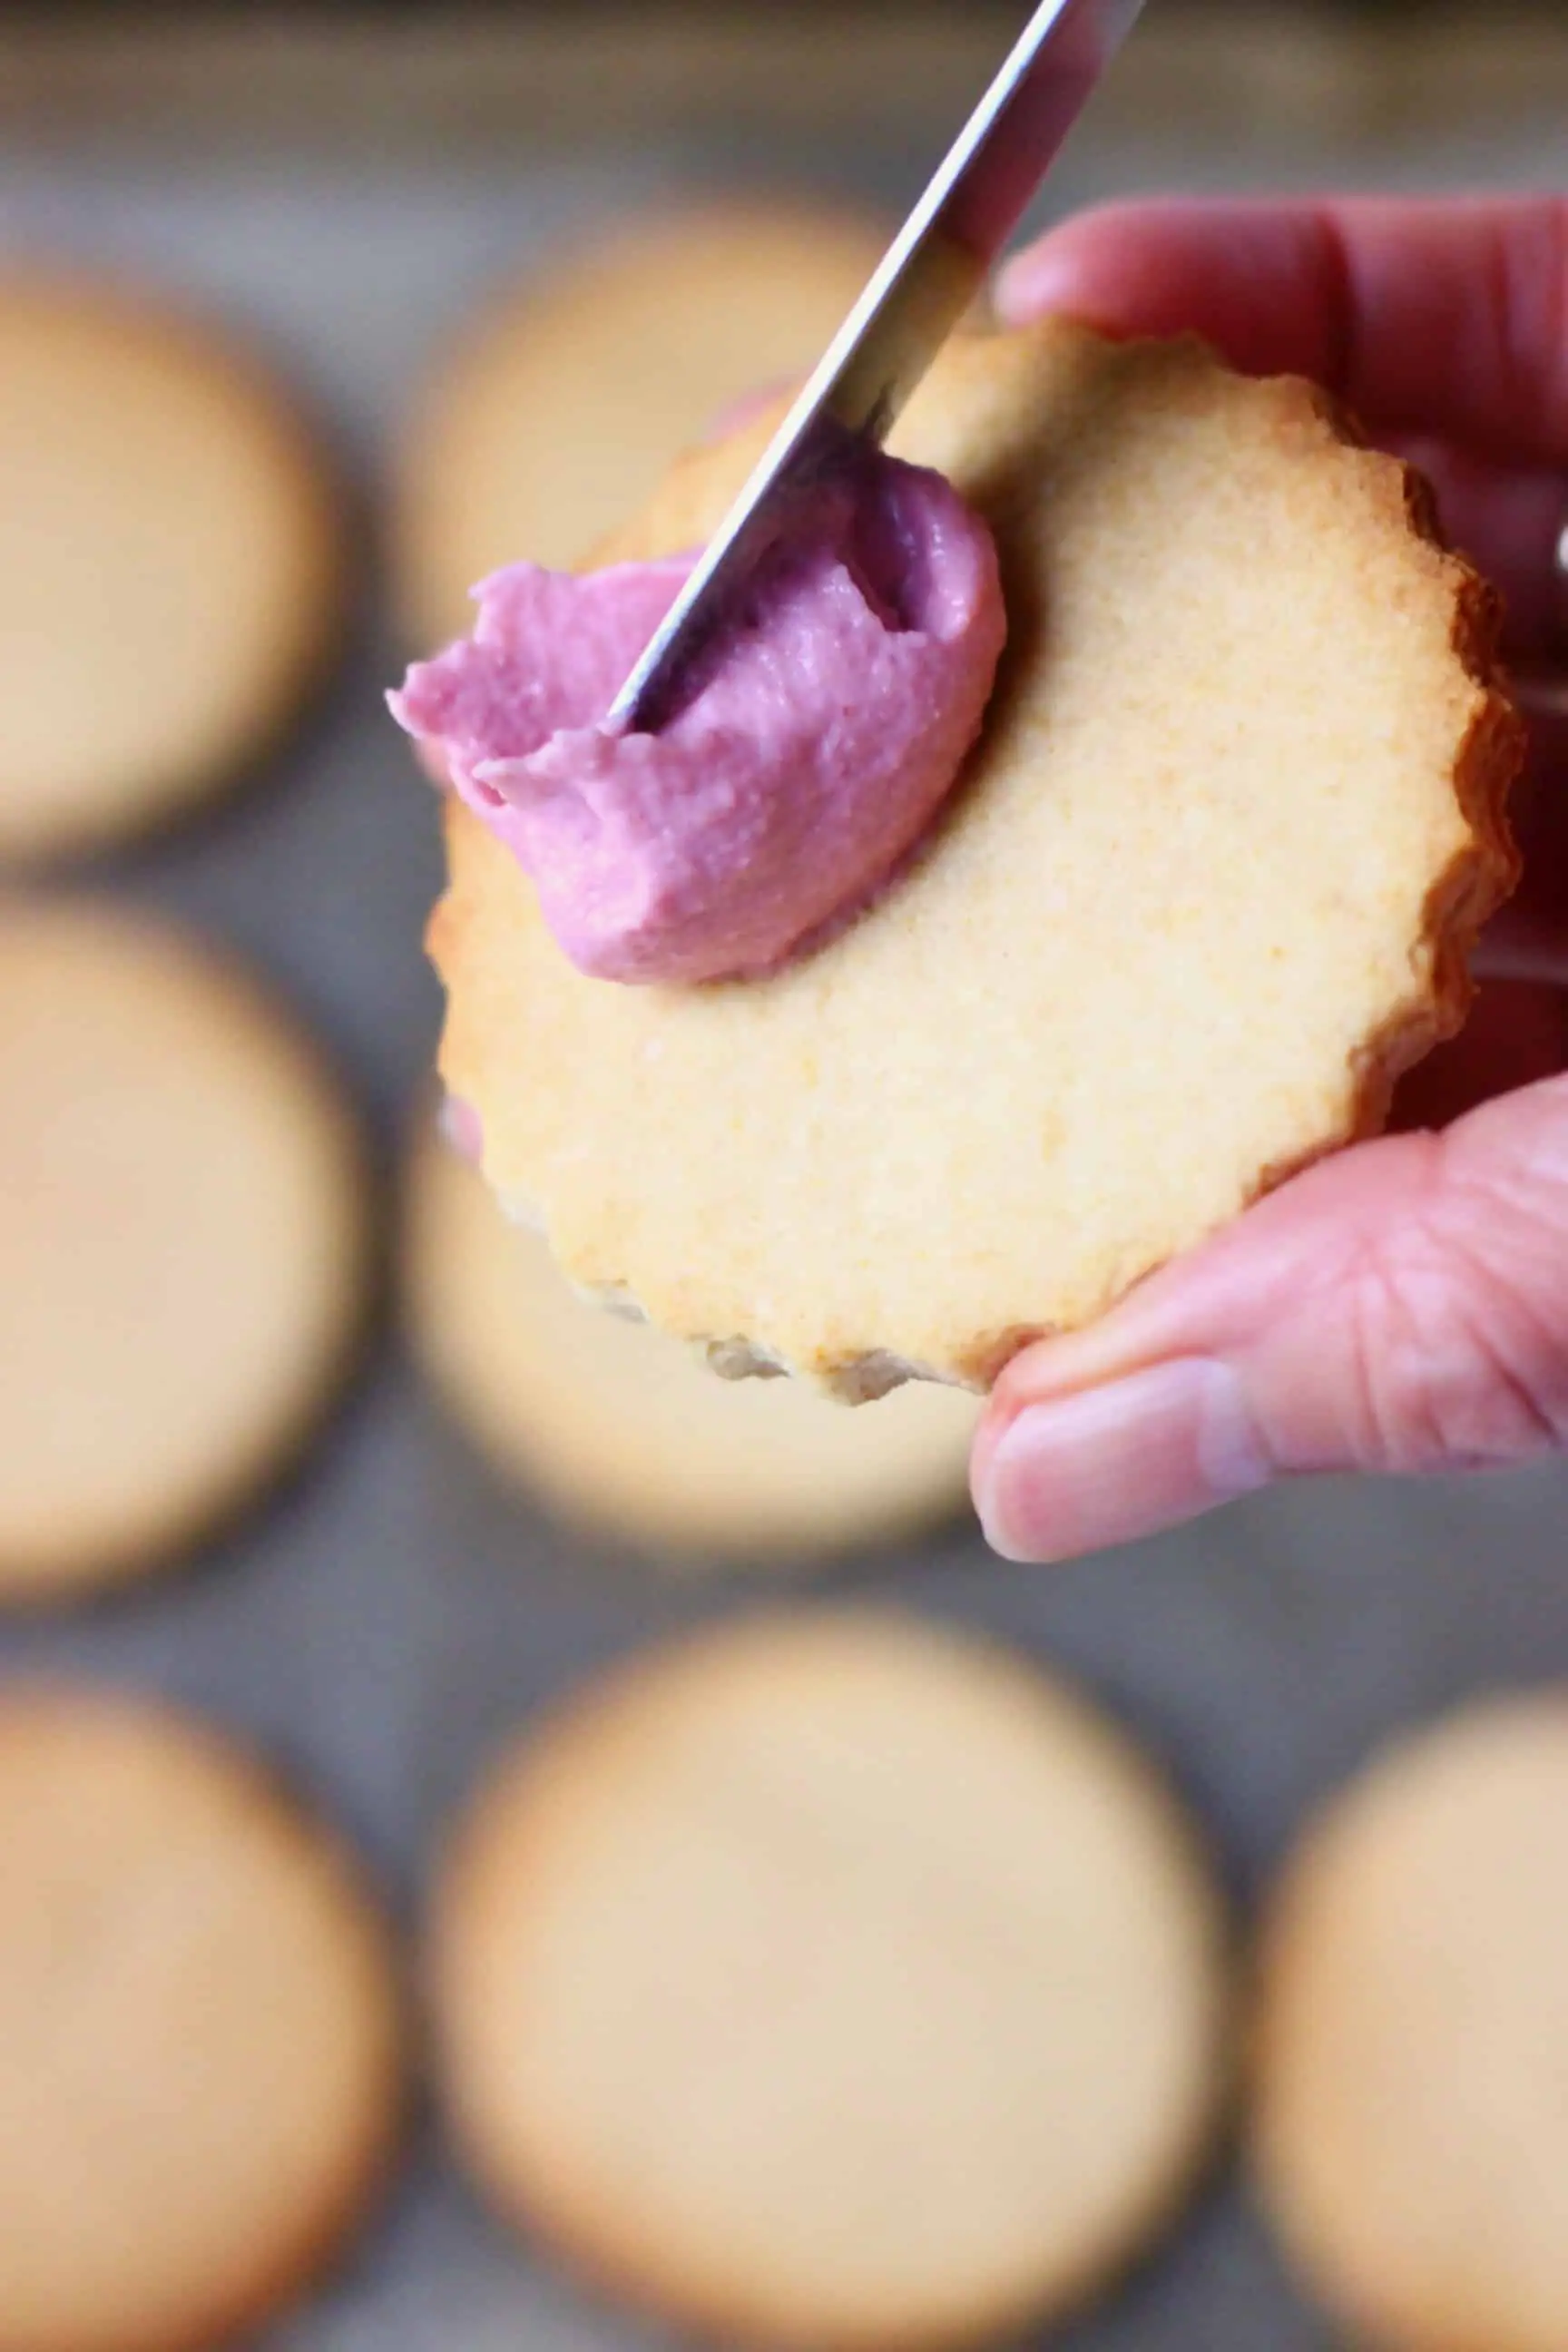 A gluten-free vegan sugar cookie with pink frosting being spread over it with a knife